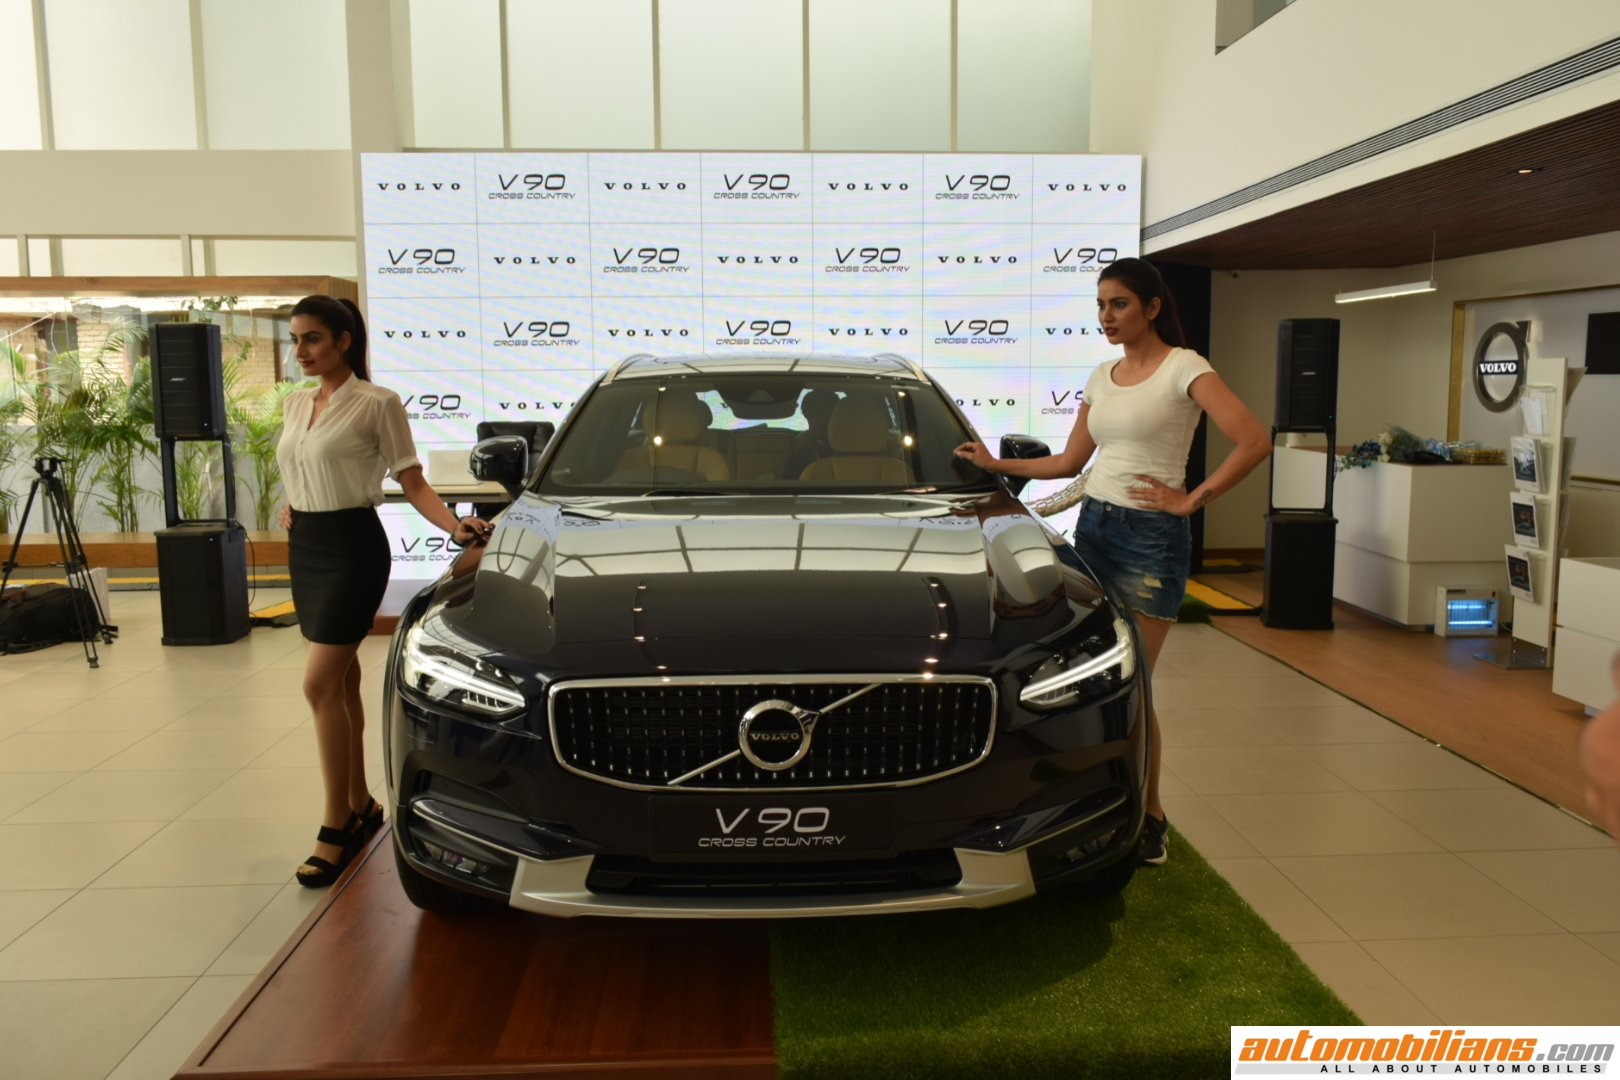 Volvo V90 Cross Country Launched In India At Rs. 60 Lakhs (Ex-Showroom, India)